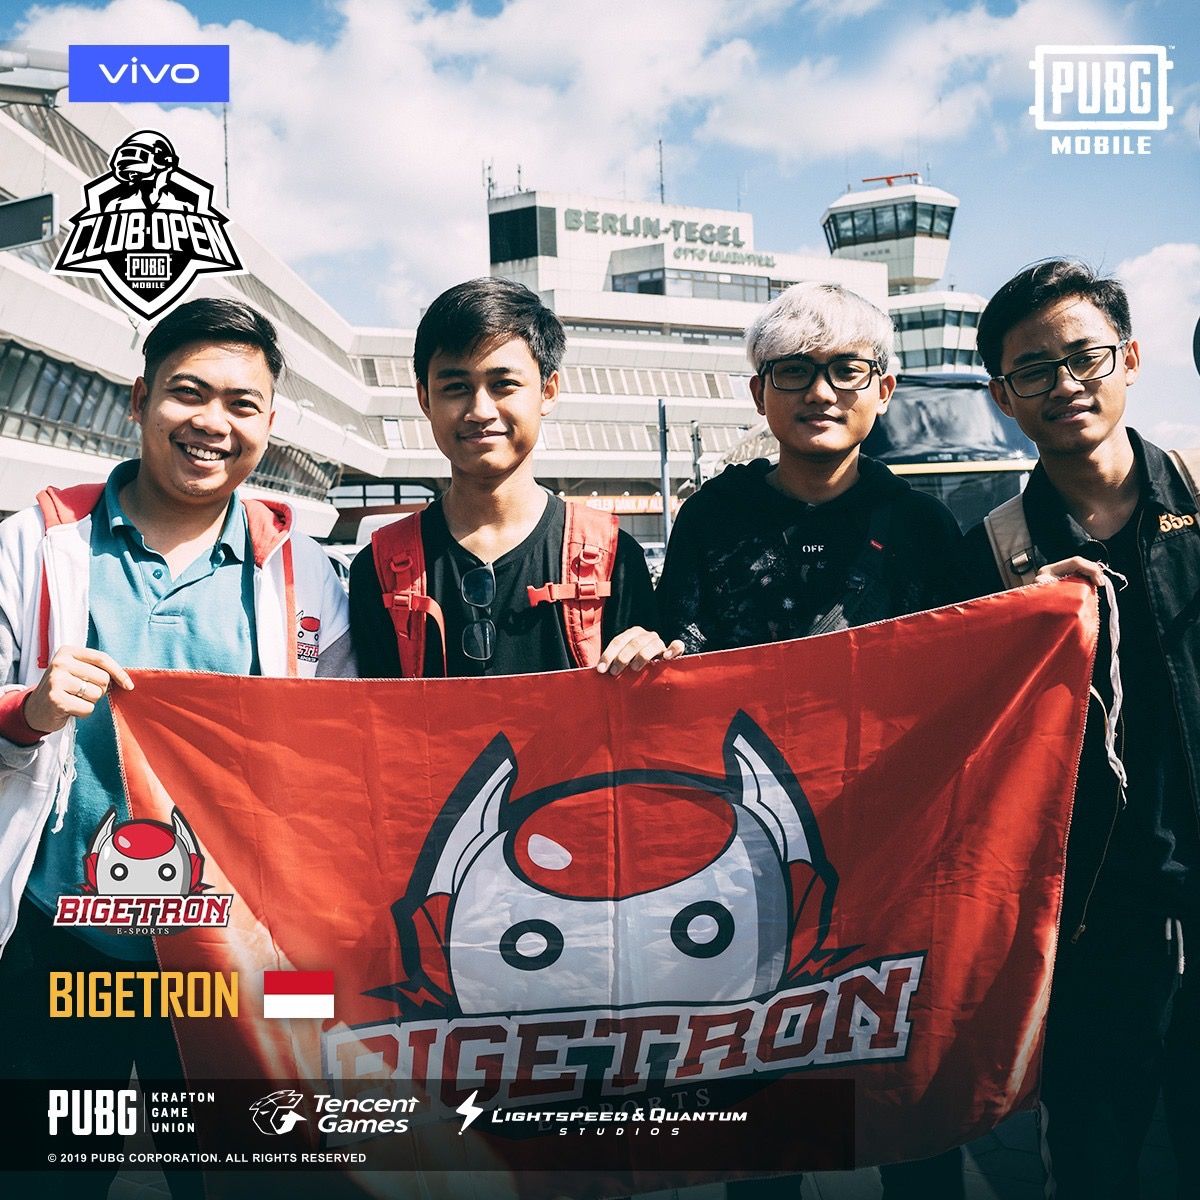 Bigetron eSport Goes to Berlin PMCO 2019